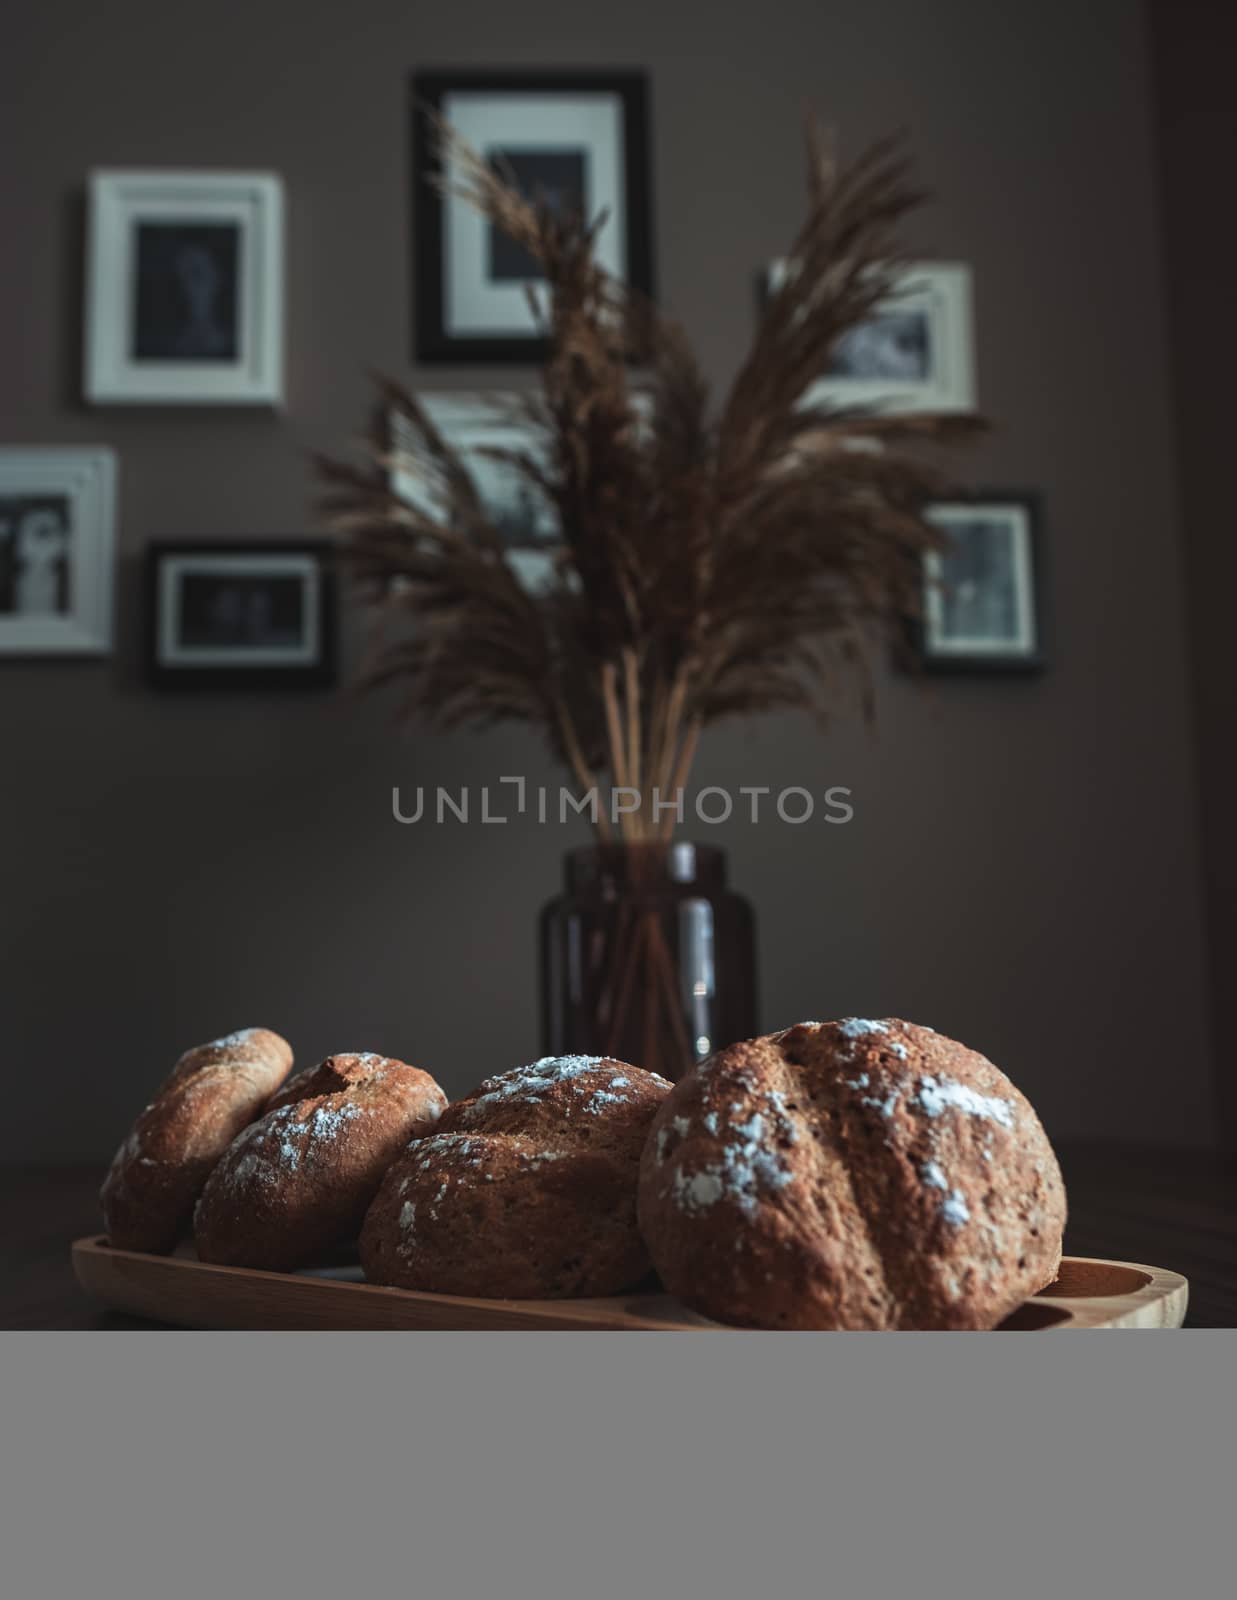 Fresh homemade breads with some decorations on the table.